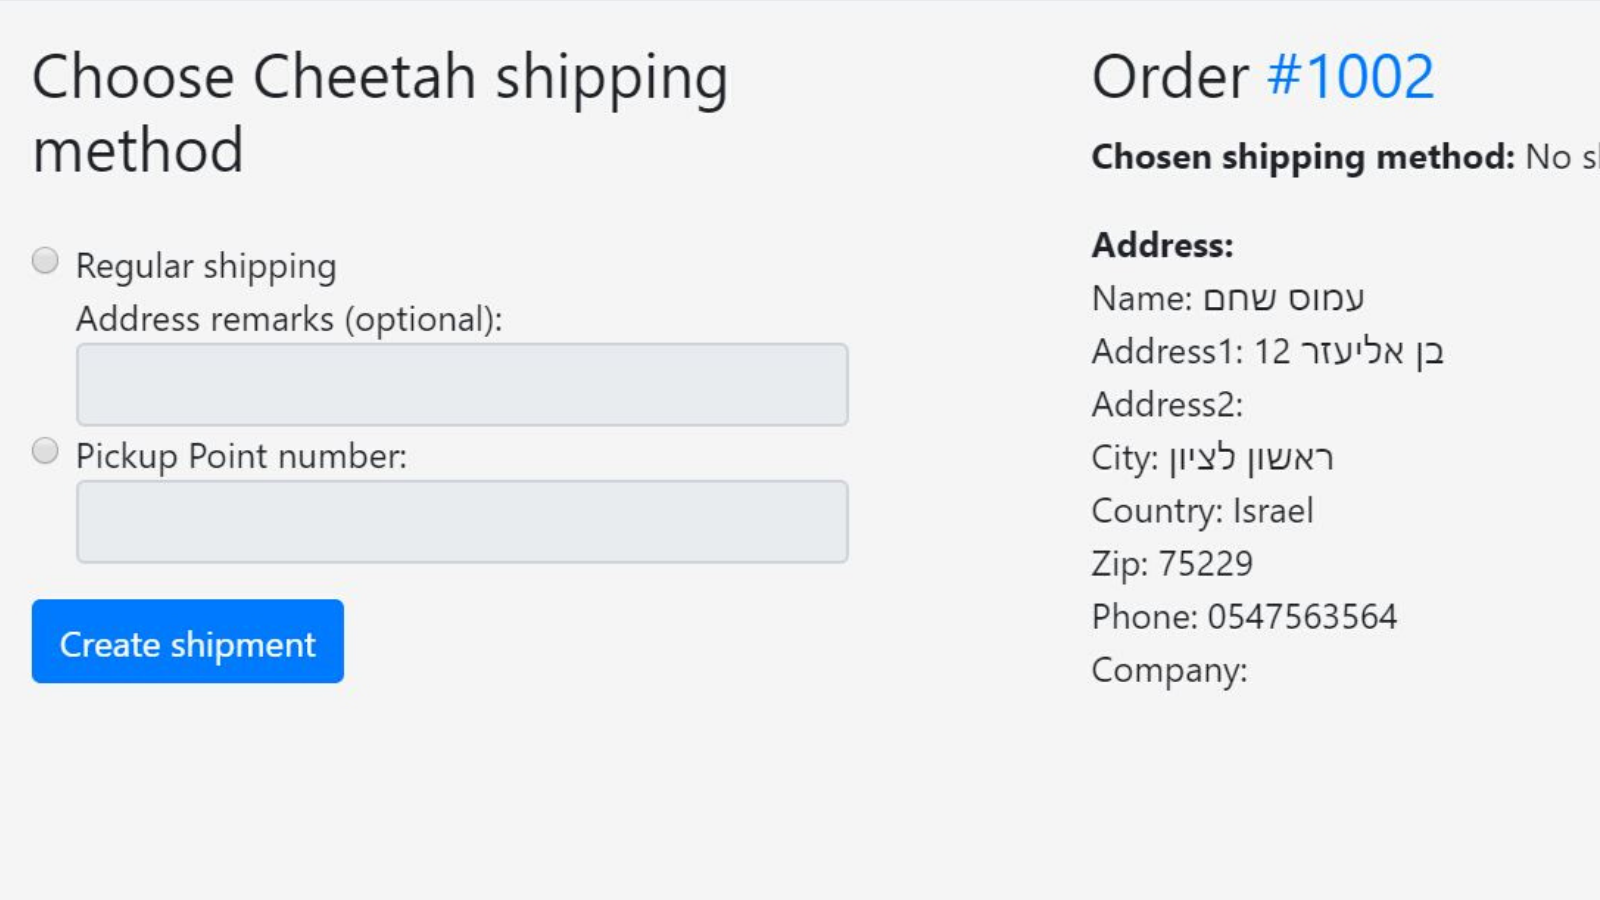 Schedule a Cheetah shipment directly from the order page